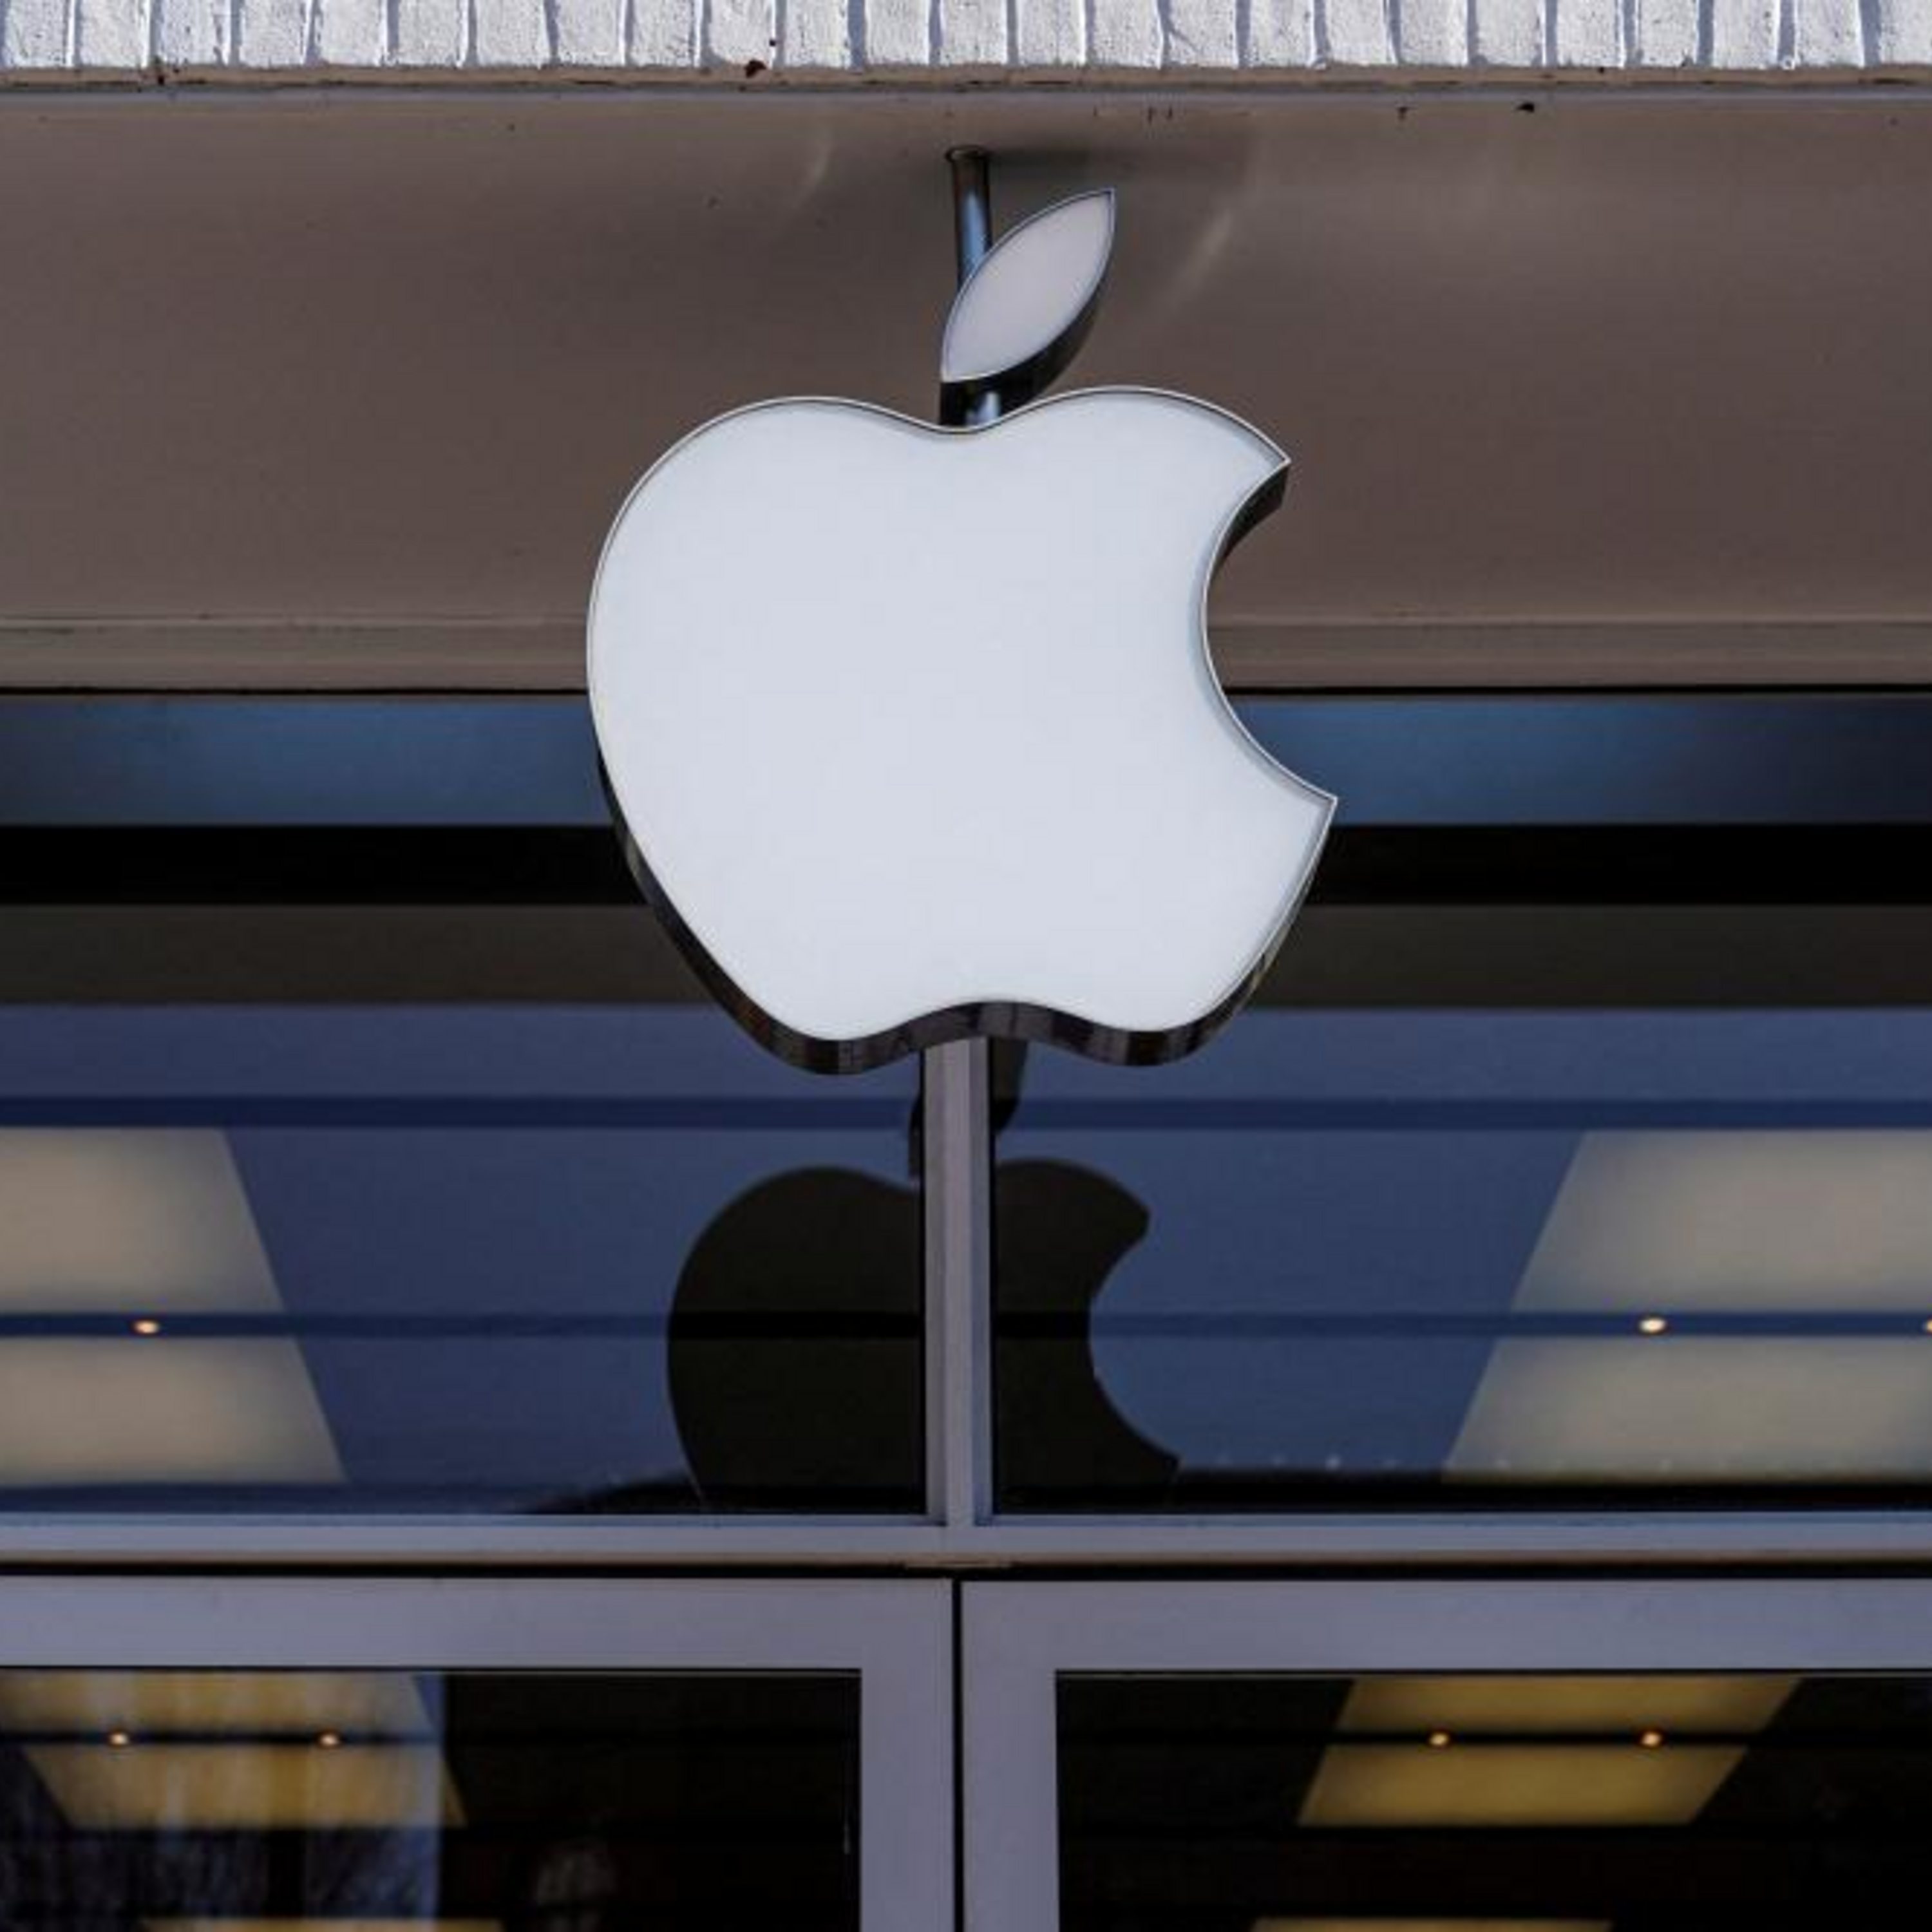 Apple workers accuse firm of 'union busting'